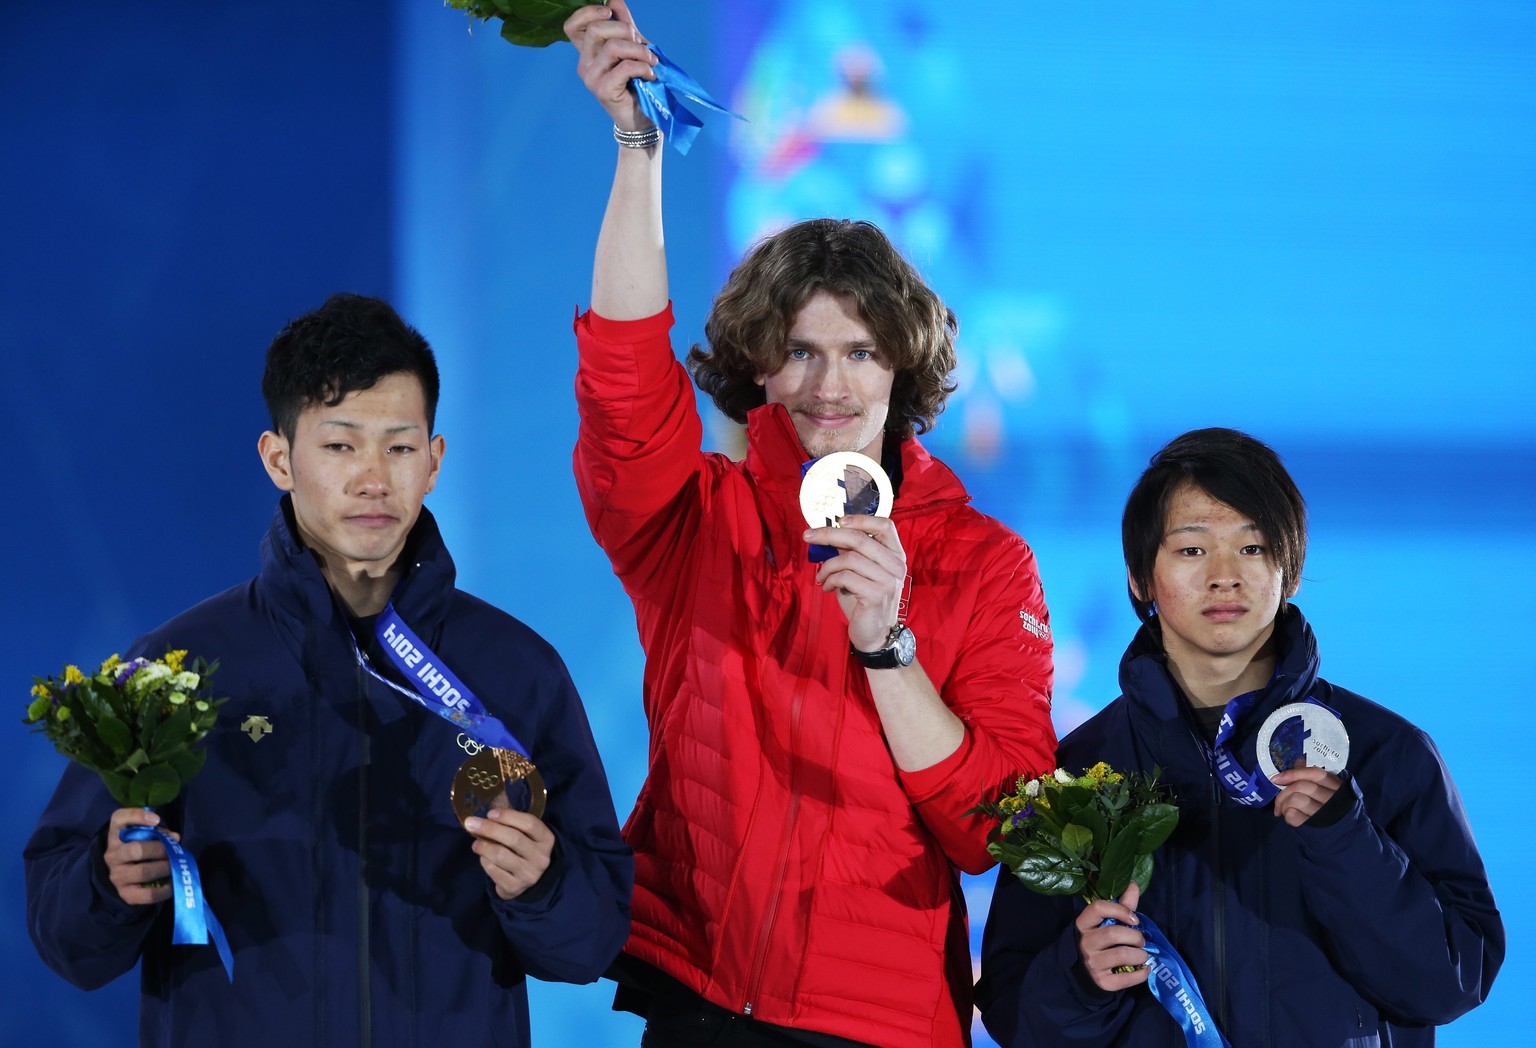 epa04072431 Gold medalist Iouri Podladtchikov (C) of Switzerland is flanked by silver medalist Ayumu Hirano (L) of Japan and bronze medalist Taku Hiraoka of Japan during the medal ceremony for Snowboa ...